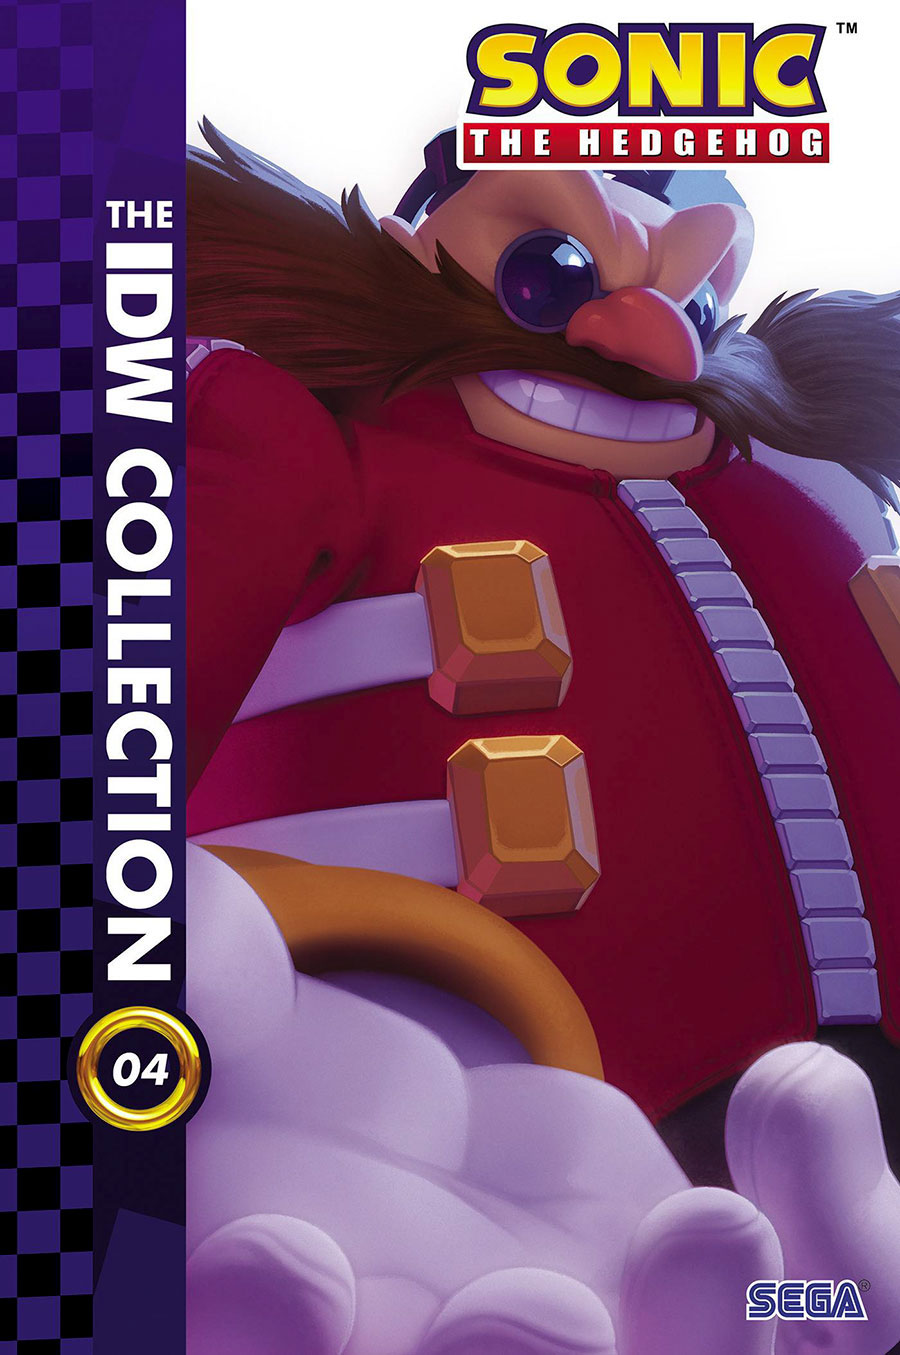 Sonic The Hedgehog IDW Collection Vol 4 HC